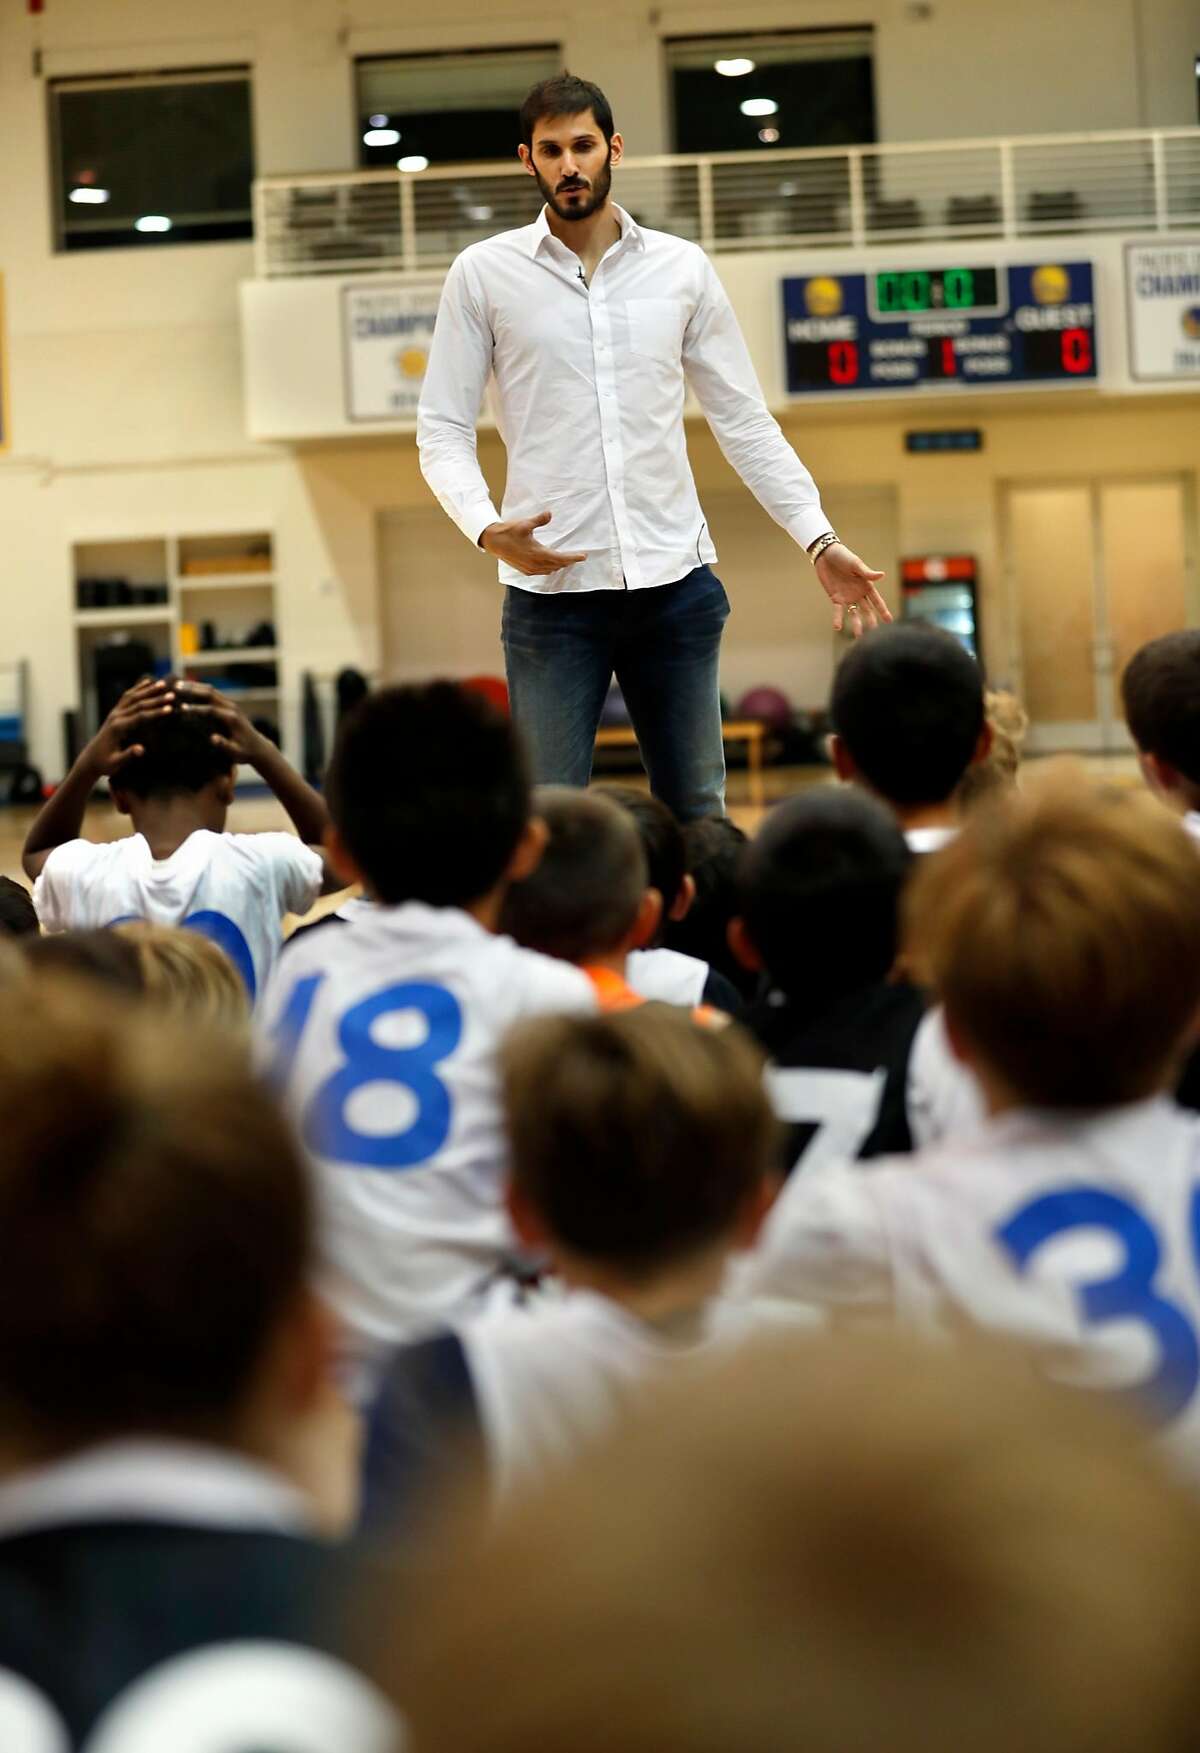 Golden State Warriors' Omri Casspi talks to basketball campers after Casspi was introduced in Oakland, Calif. on Wednesday, July 12, 2017.